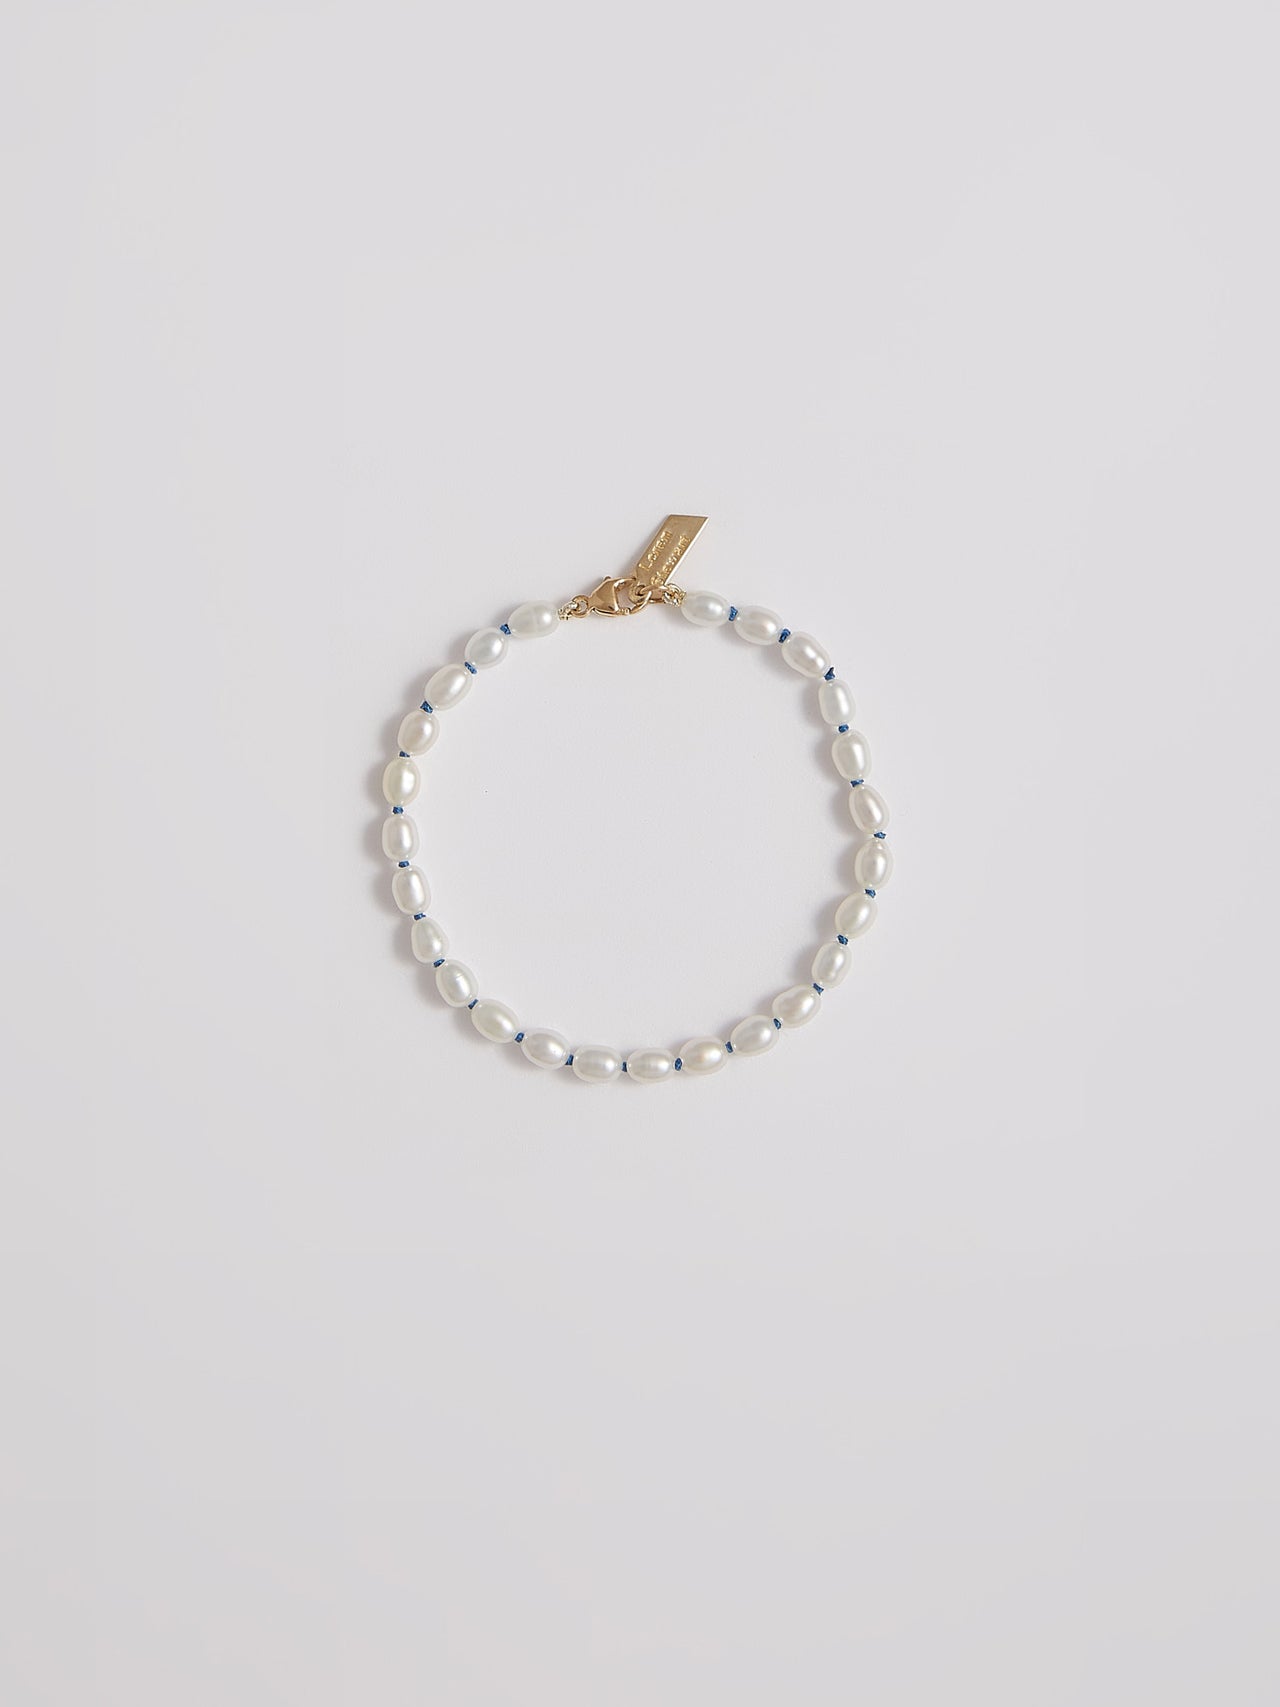 Delicate Bracelet With Freshwater Pearl and String 